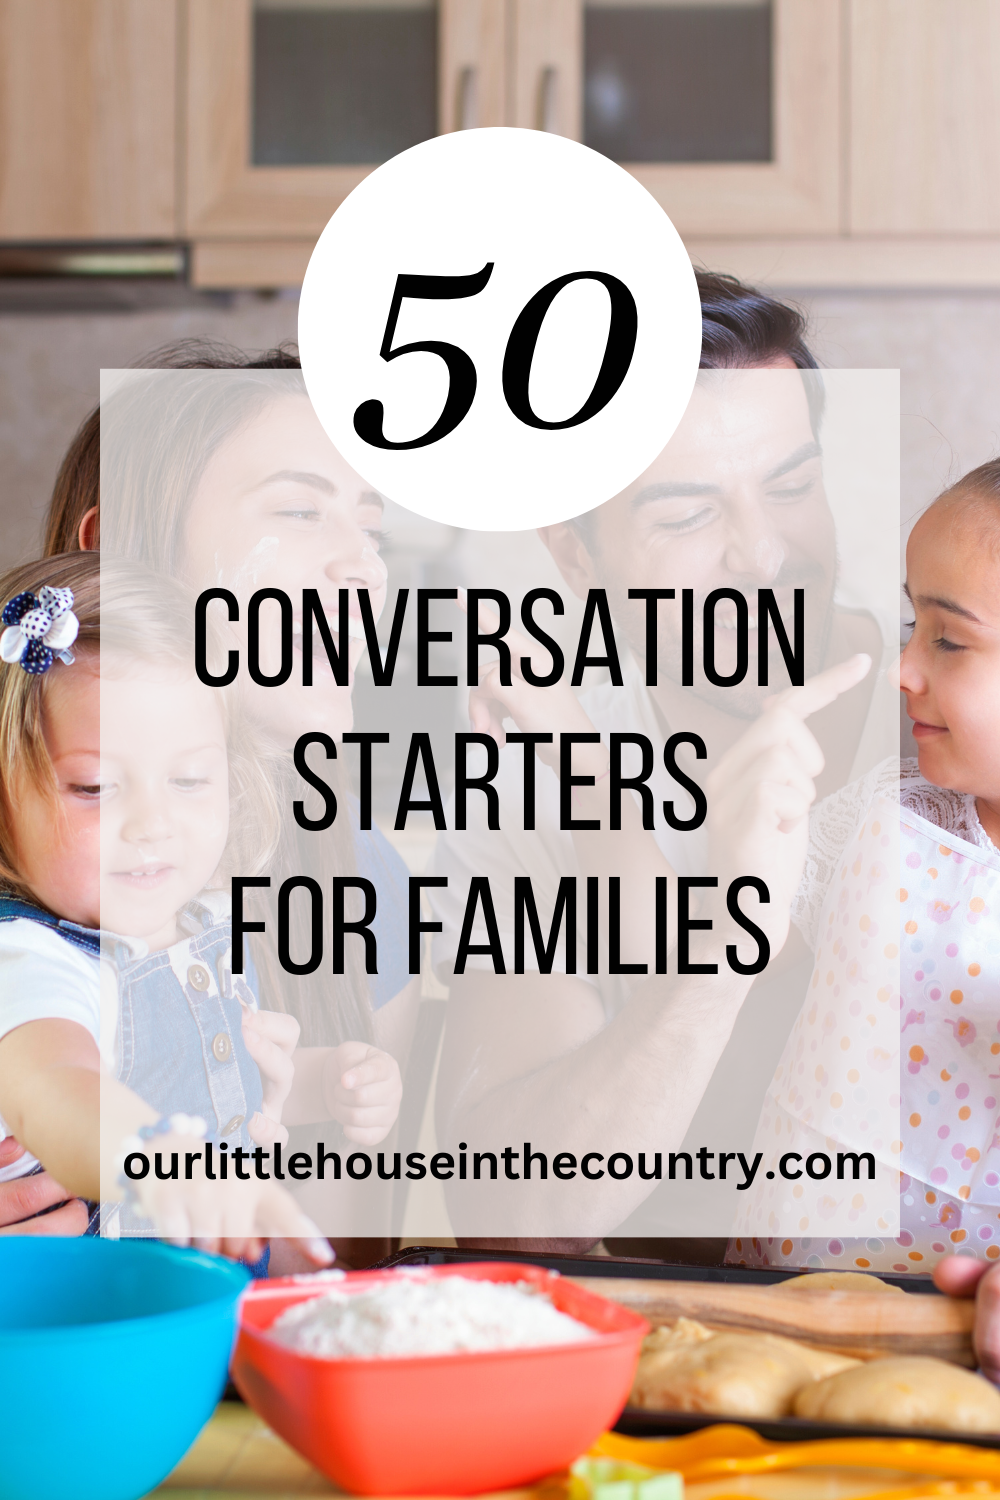 50 Conversation Starters for Families